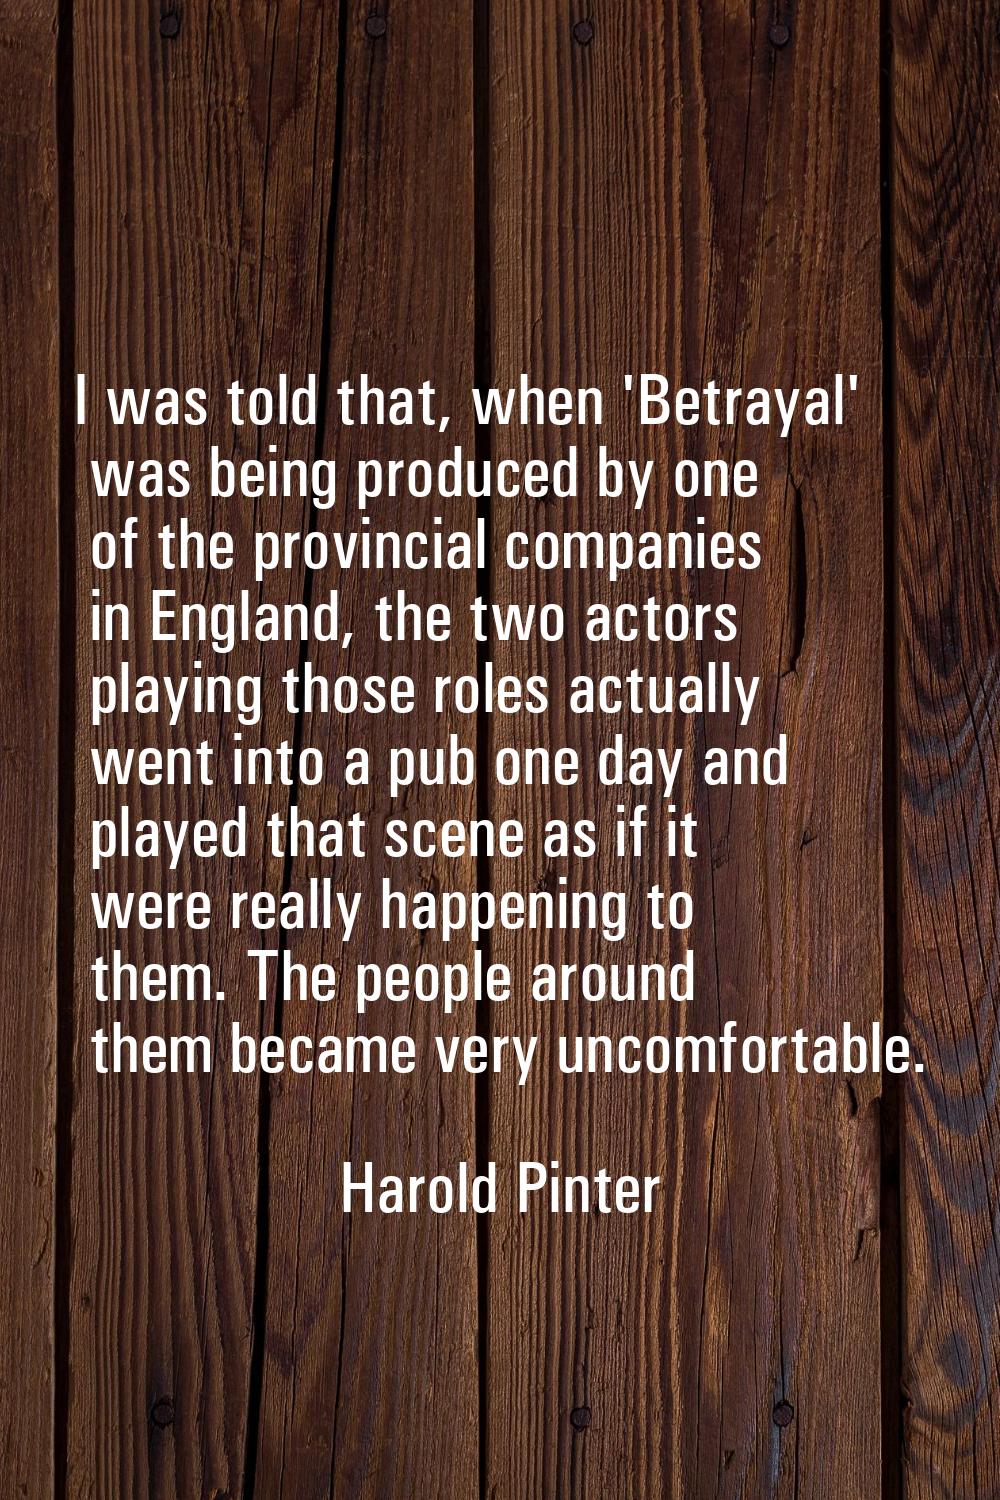 I was told that, when 'Betrayal' was being produced by one of the provincial companies in England, 